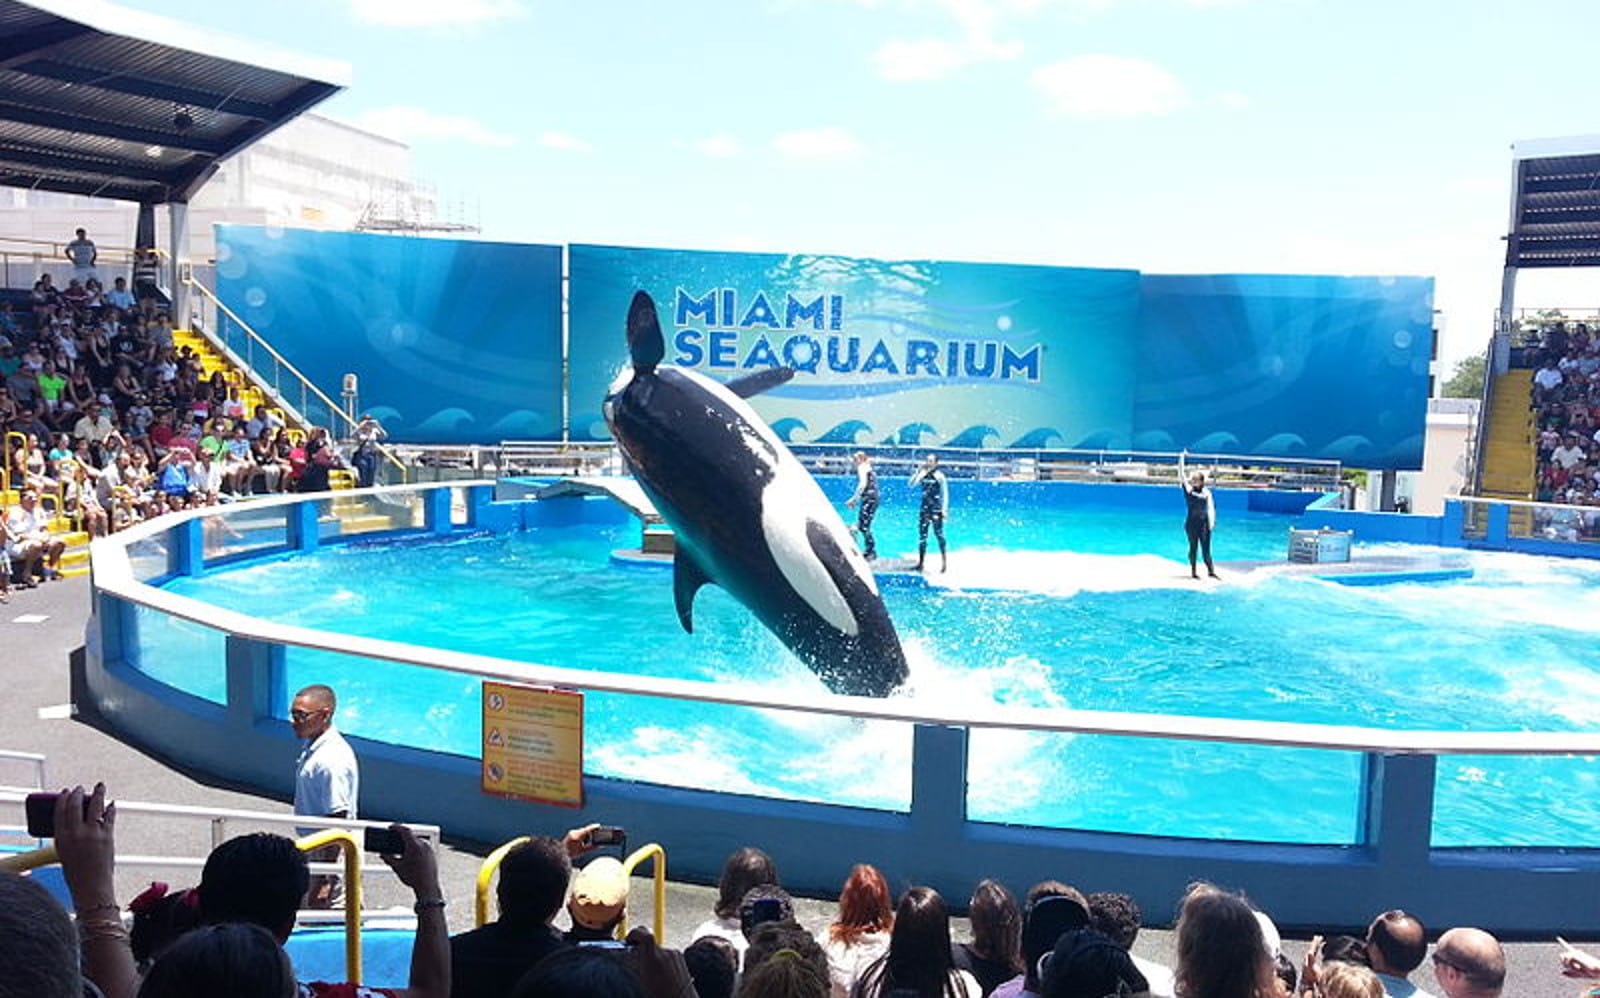 Lolita Might Have to Stay in Miami Seaquarium, but the Battle for Her Freedom is Hardly Over